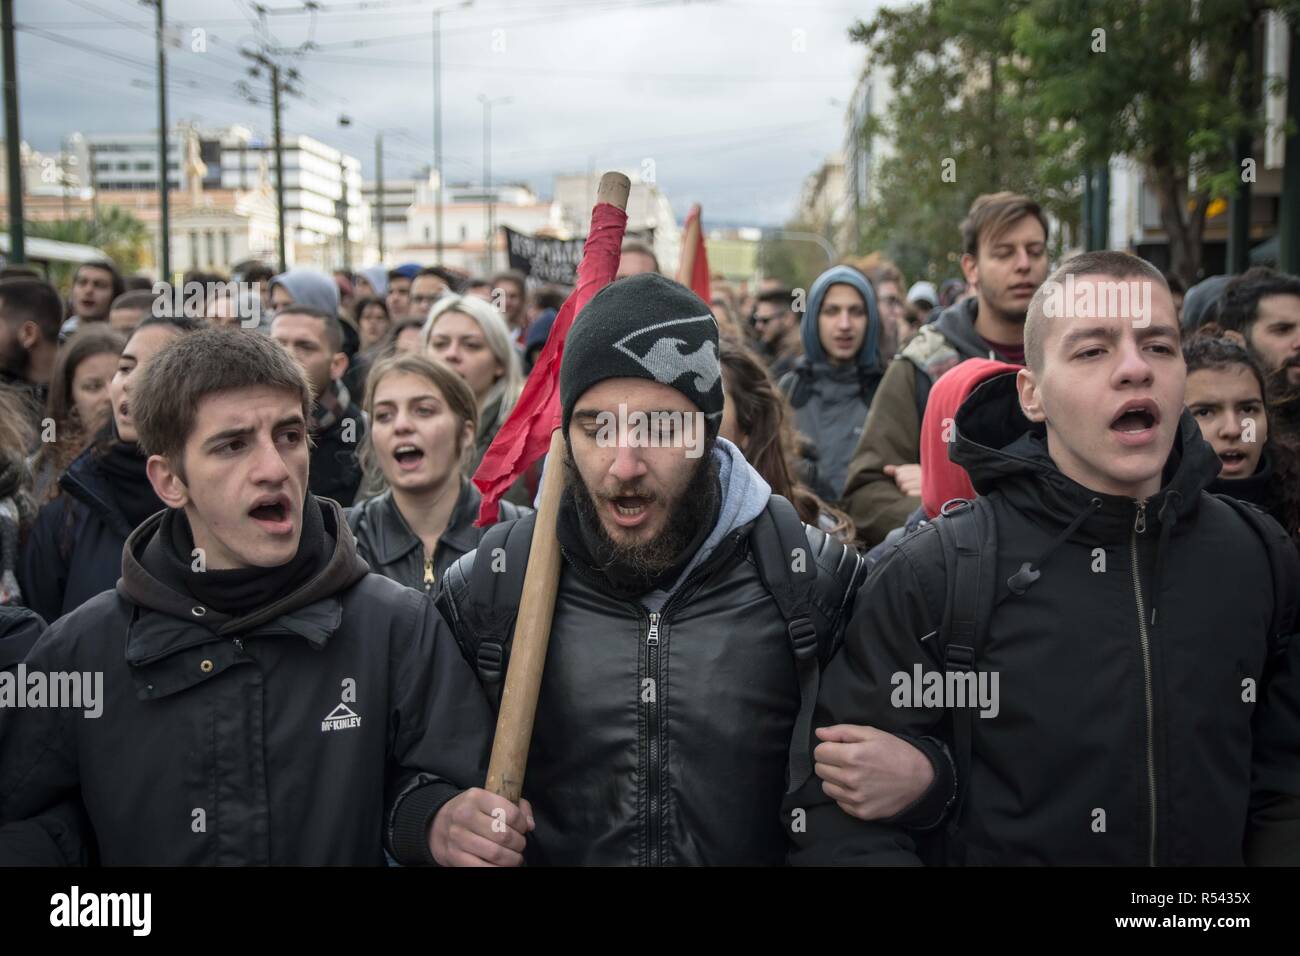 Athens, Greece. 29th Nov, 2018. Protesters are seen chanting slogans during the protest.Hundreds of students protest against the rise of fascism and racism in schools. Credit: Nikolas Joao Kokovlis/SOPA Images/ZUMA Wire/Alamy Live News Stock Photo